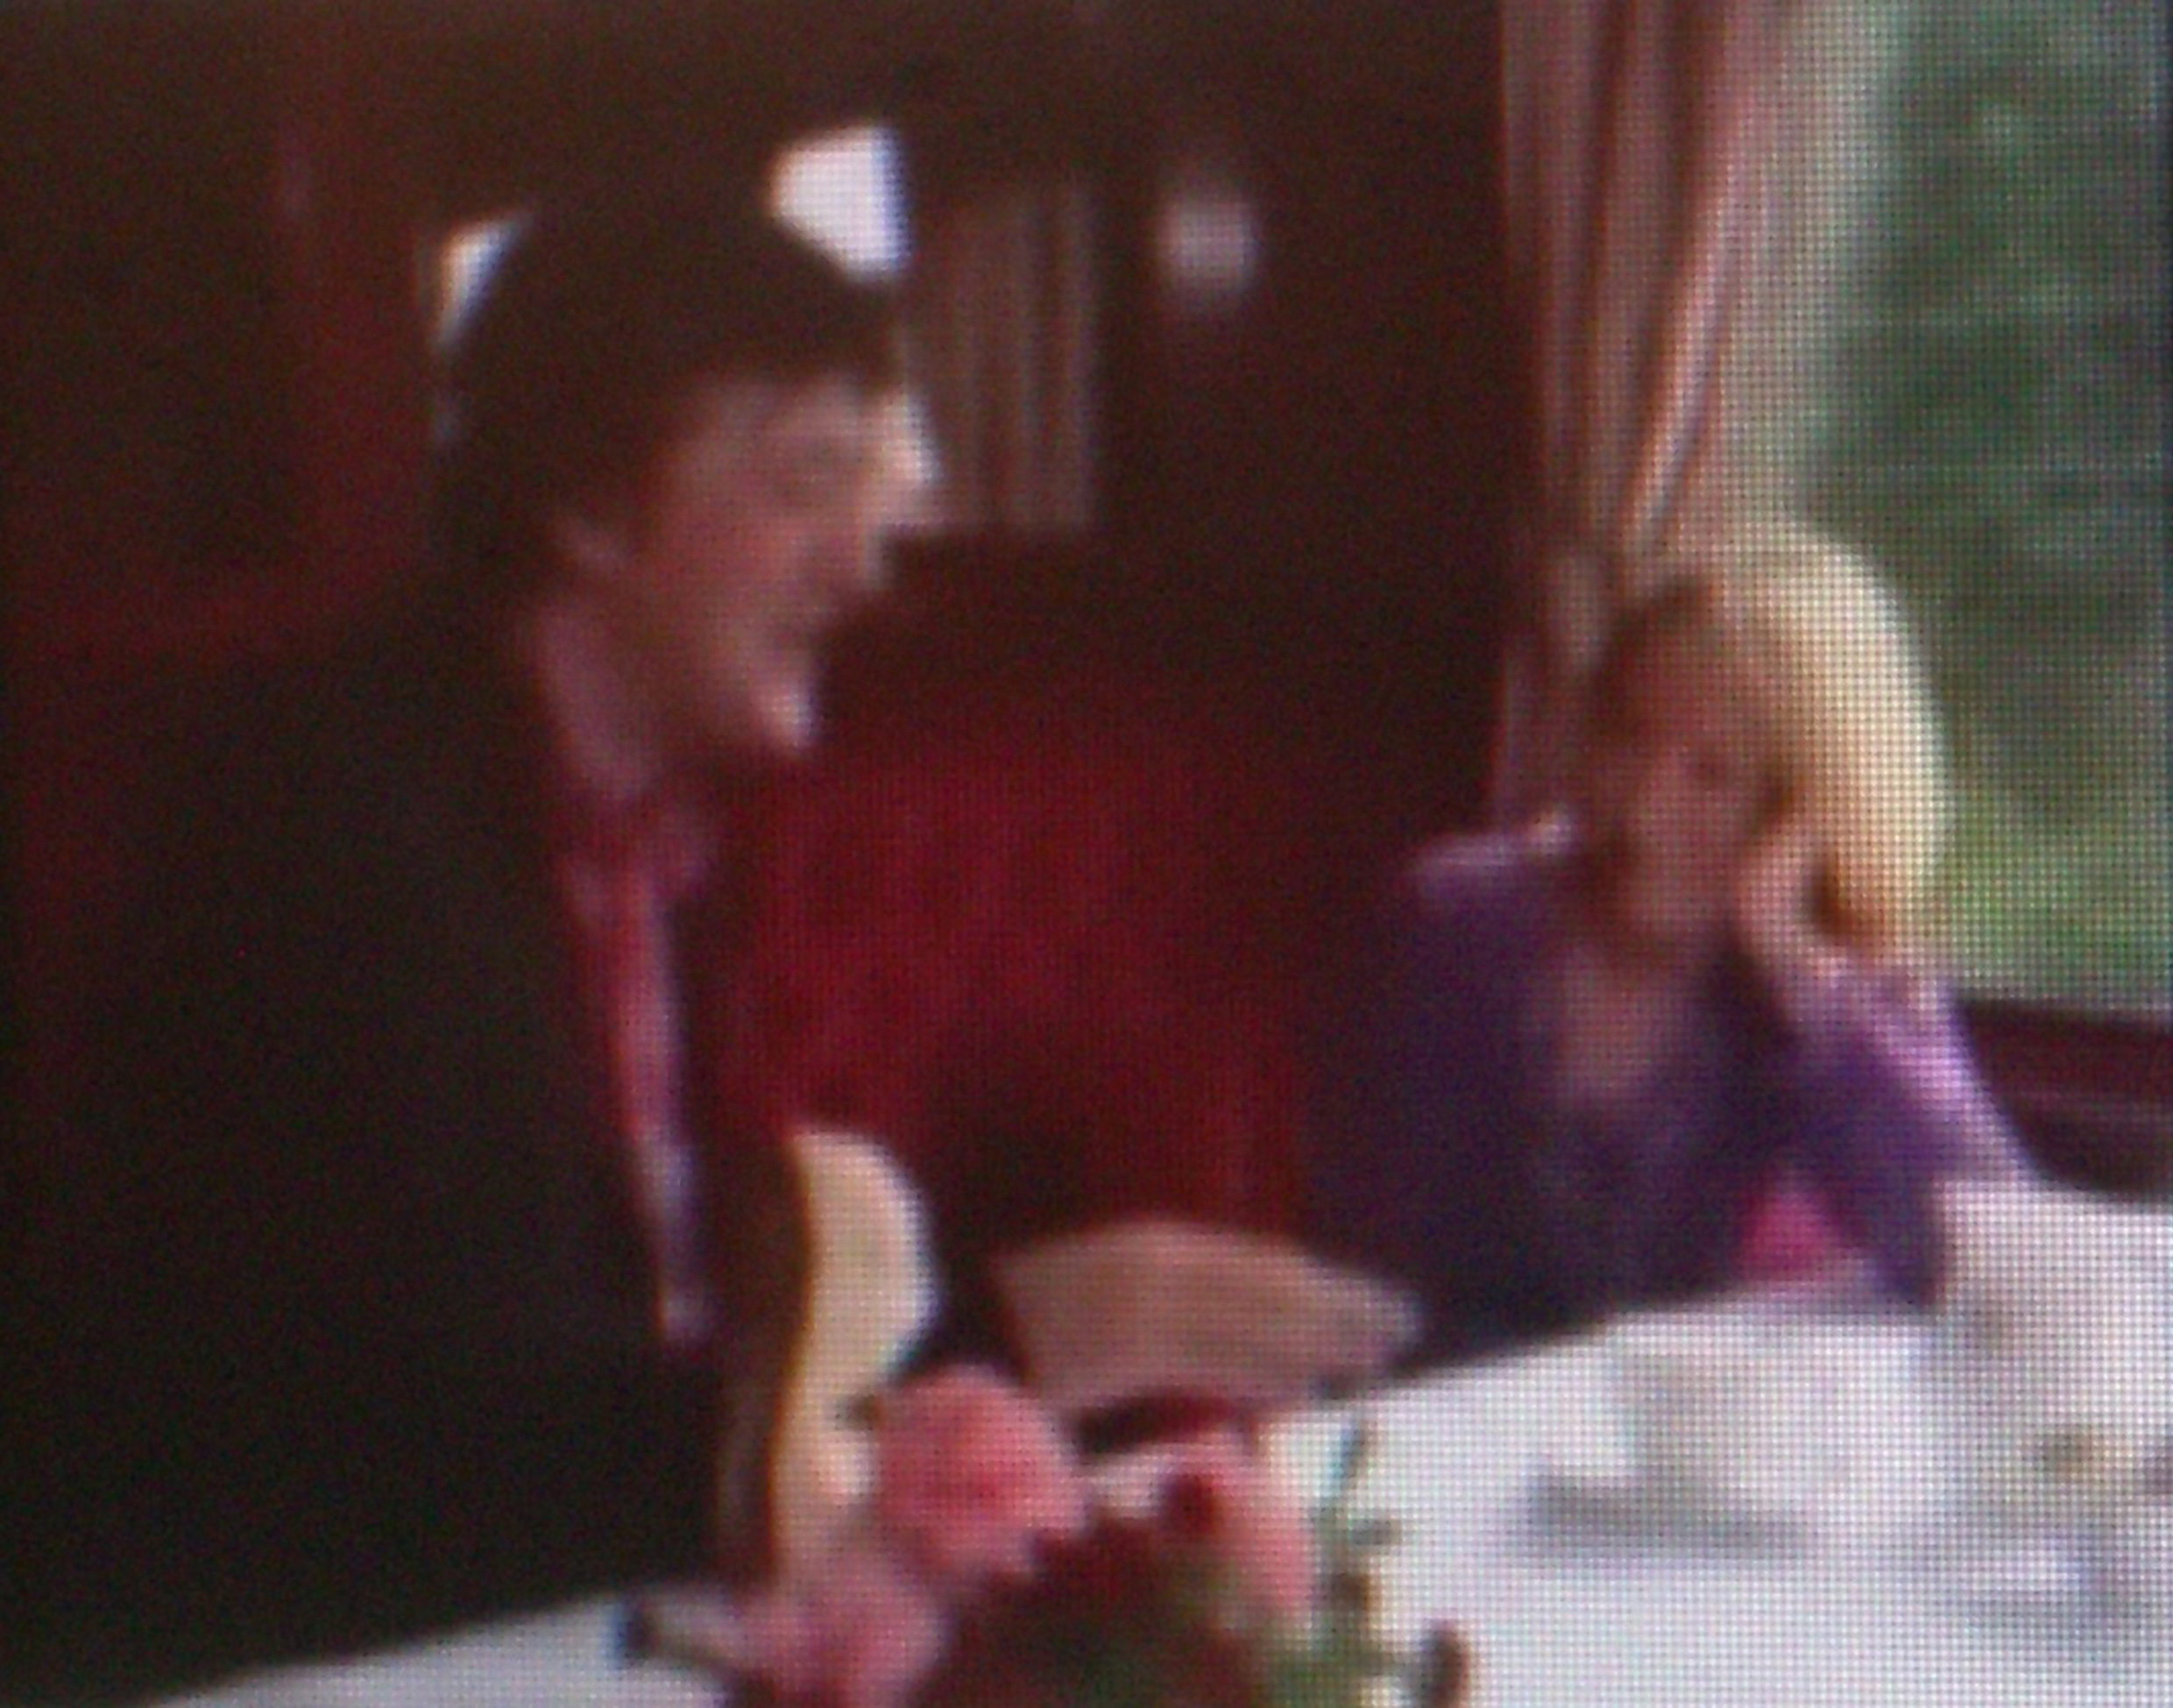 Stephen Fry and J.K. Rowling on the Hogwarts Express